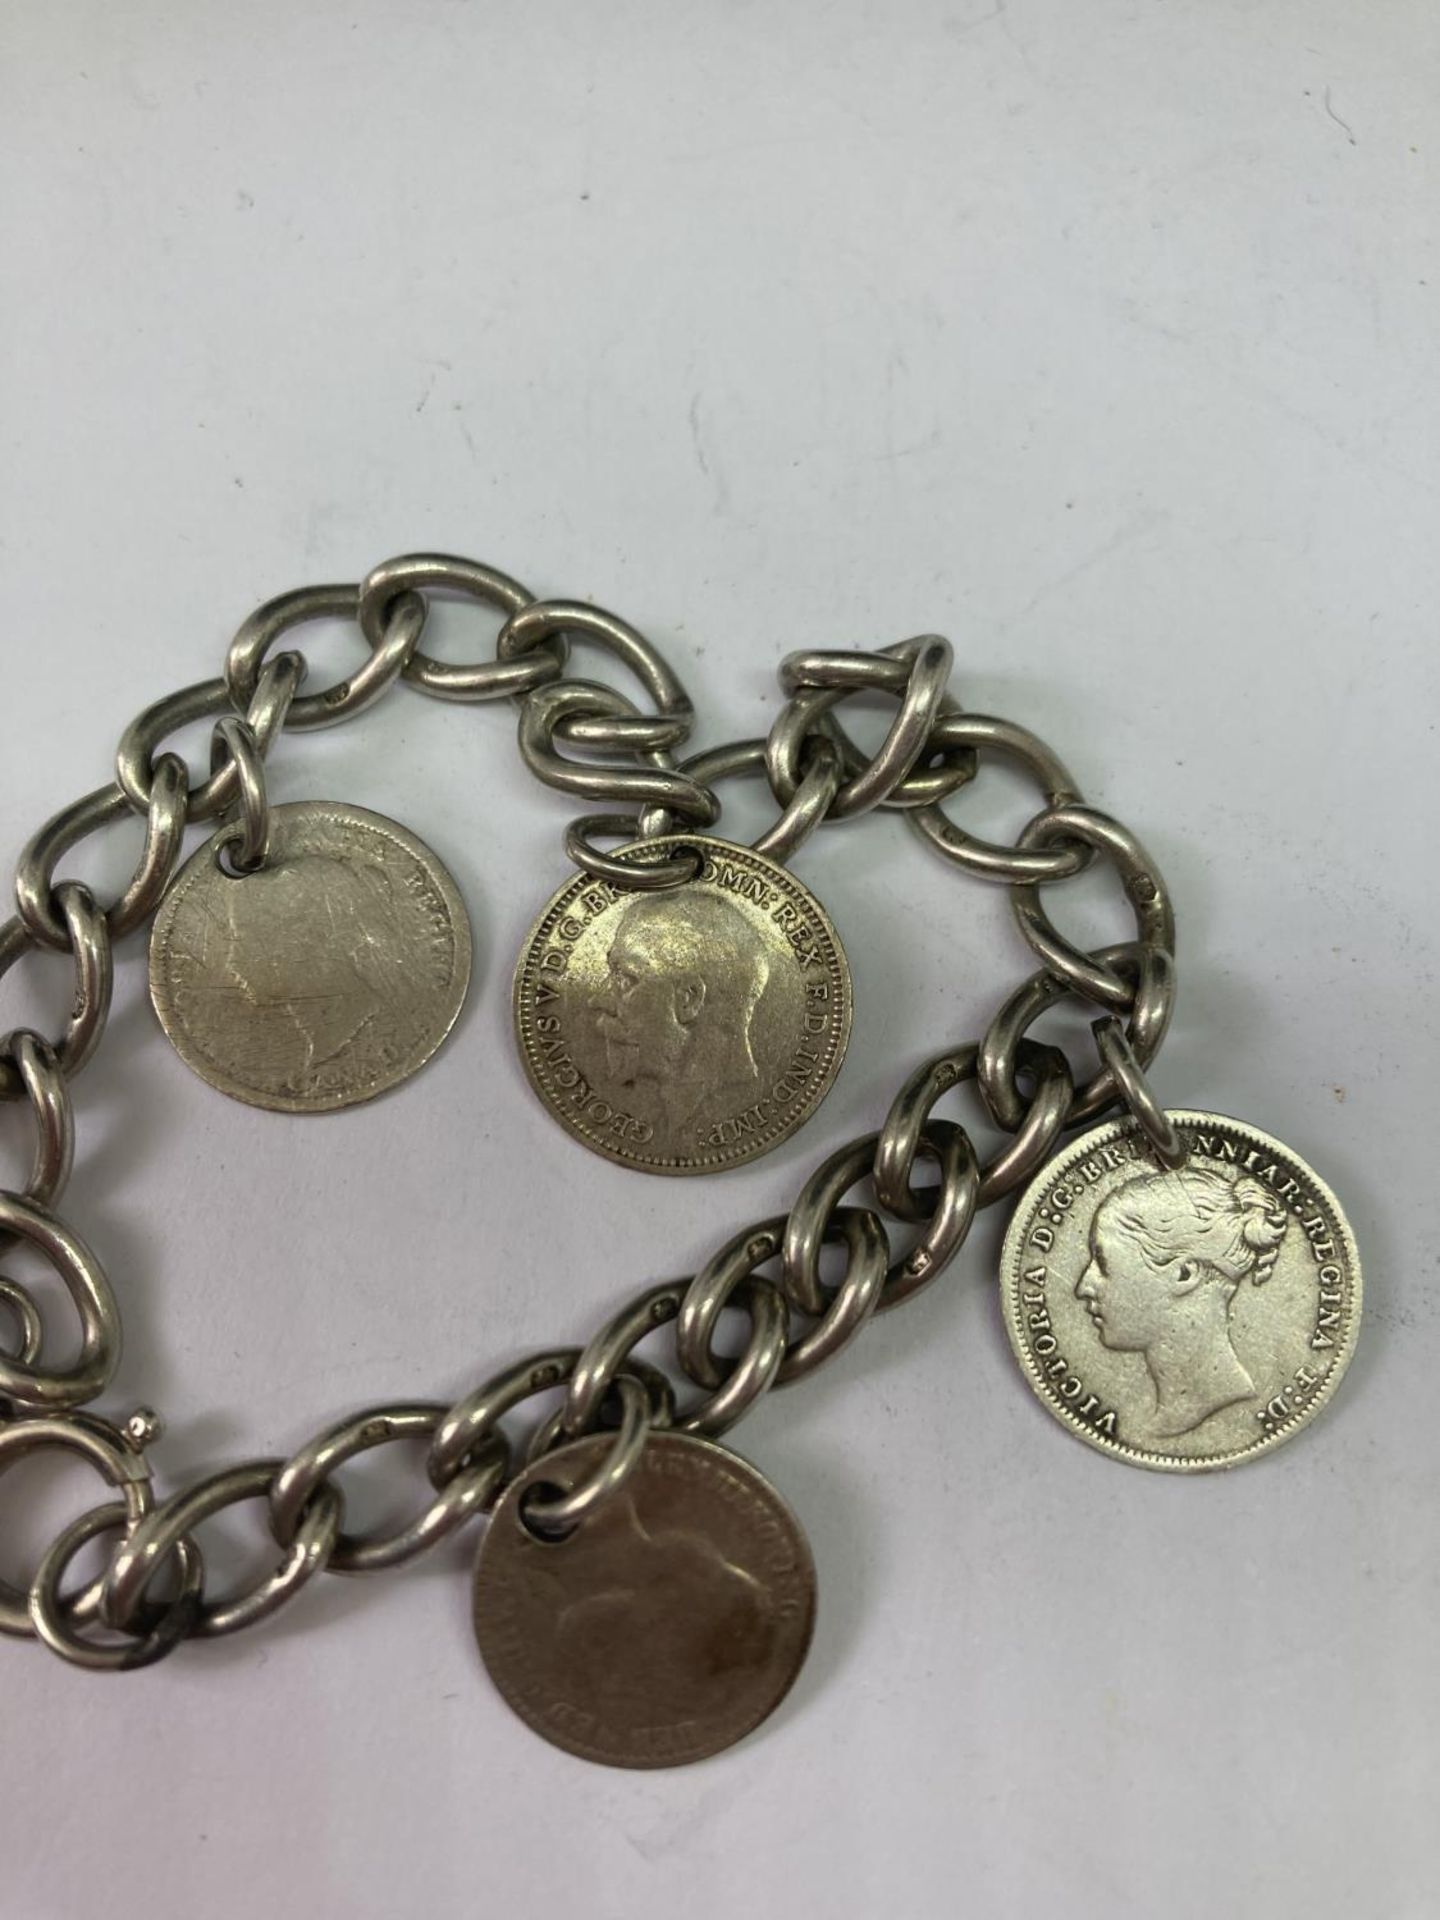 A SILVER COIN CHARM BRACELET - Image 2 of 3